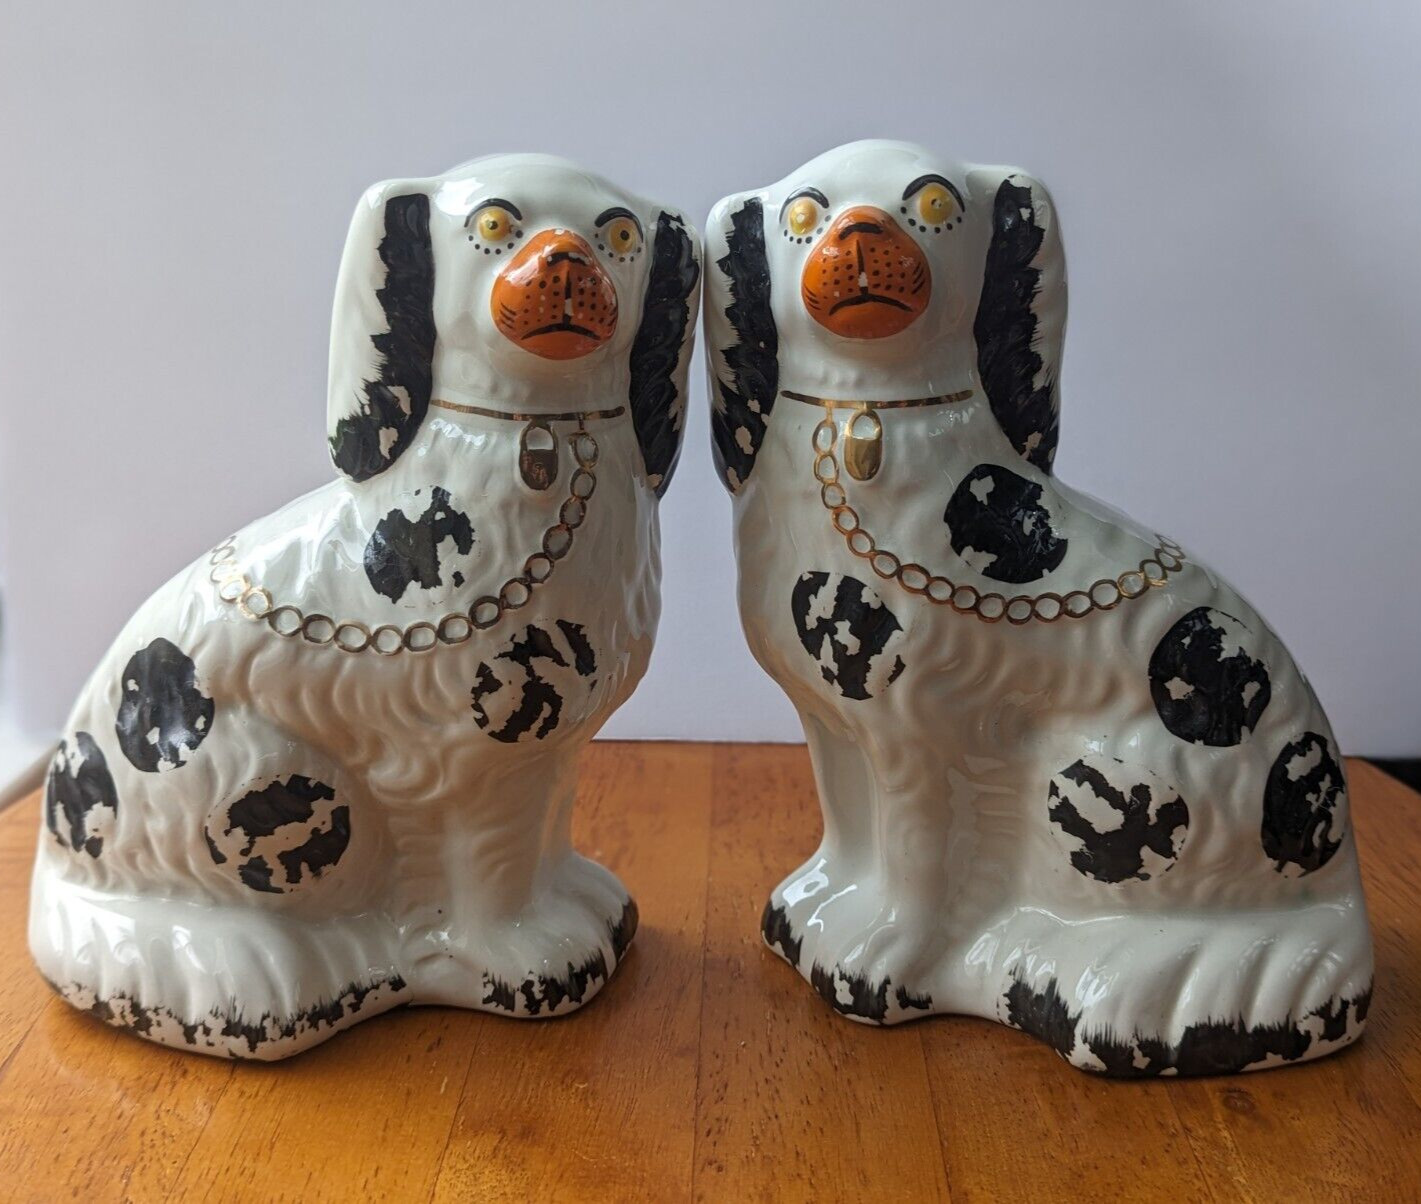 Vintage burleigh staffordshire dogs matched set pair